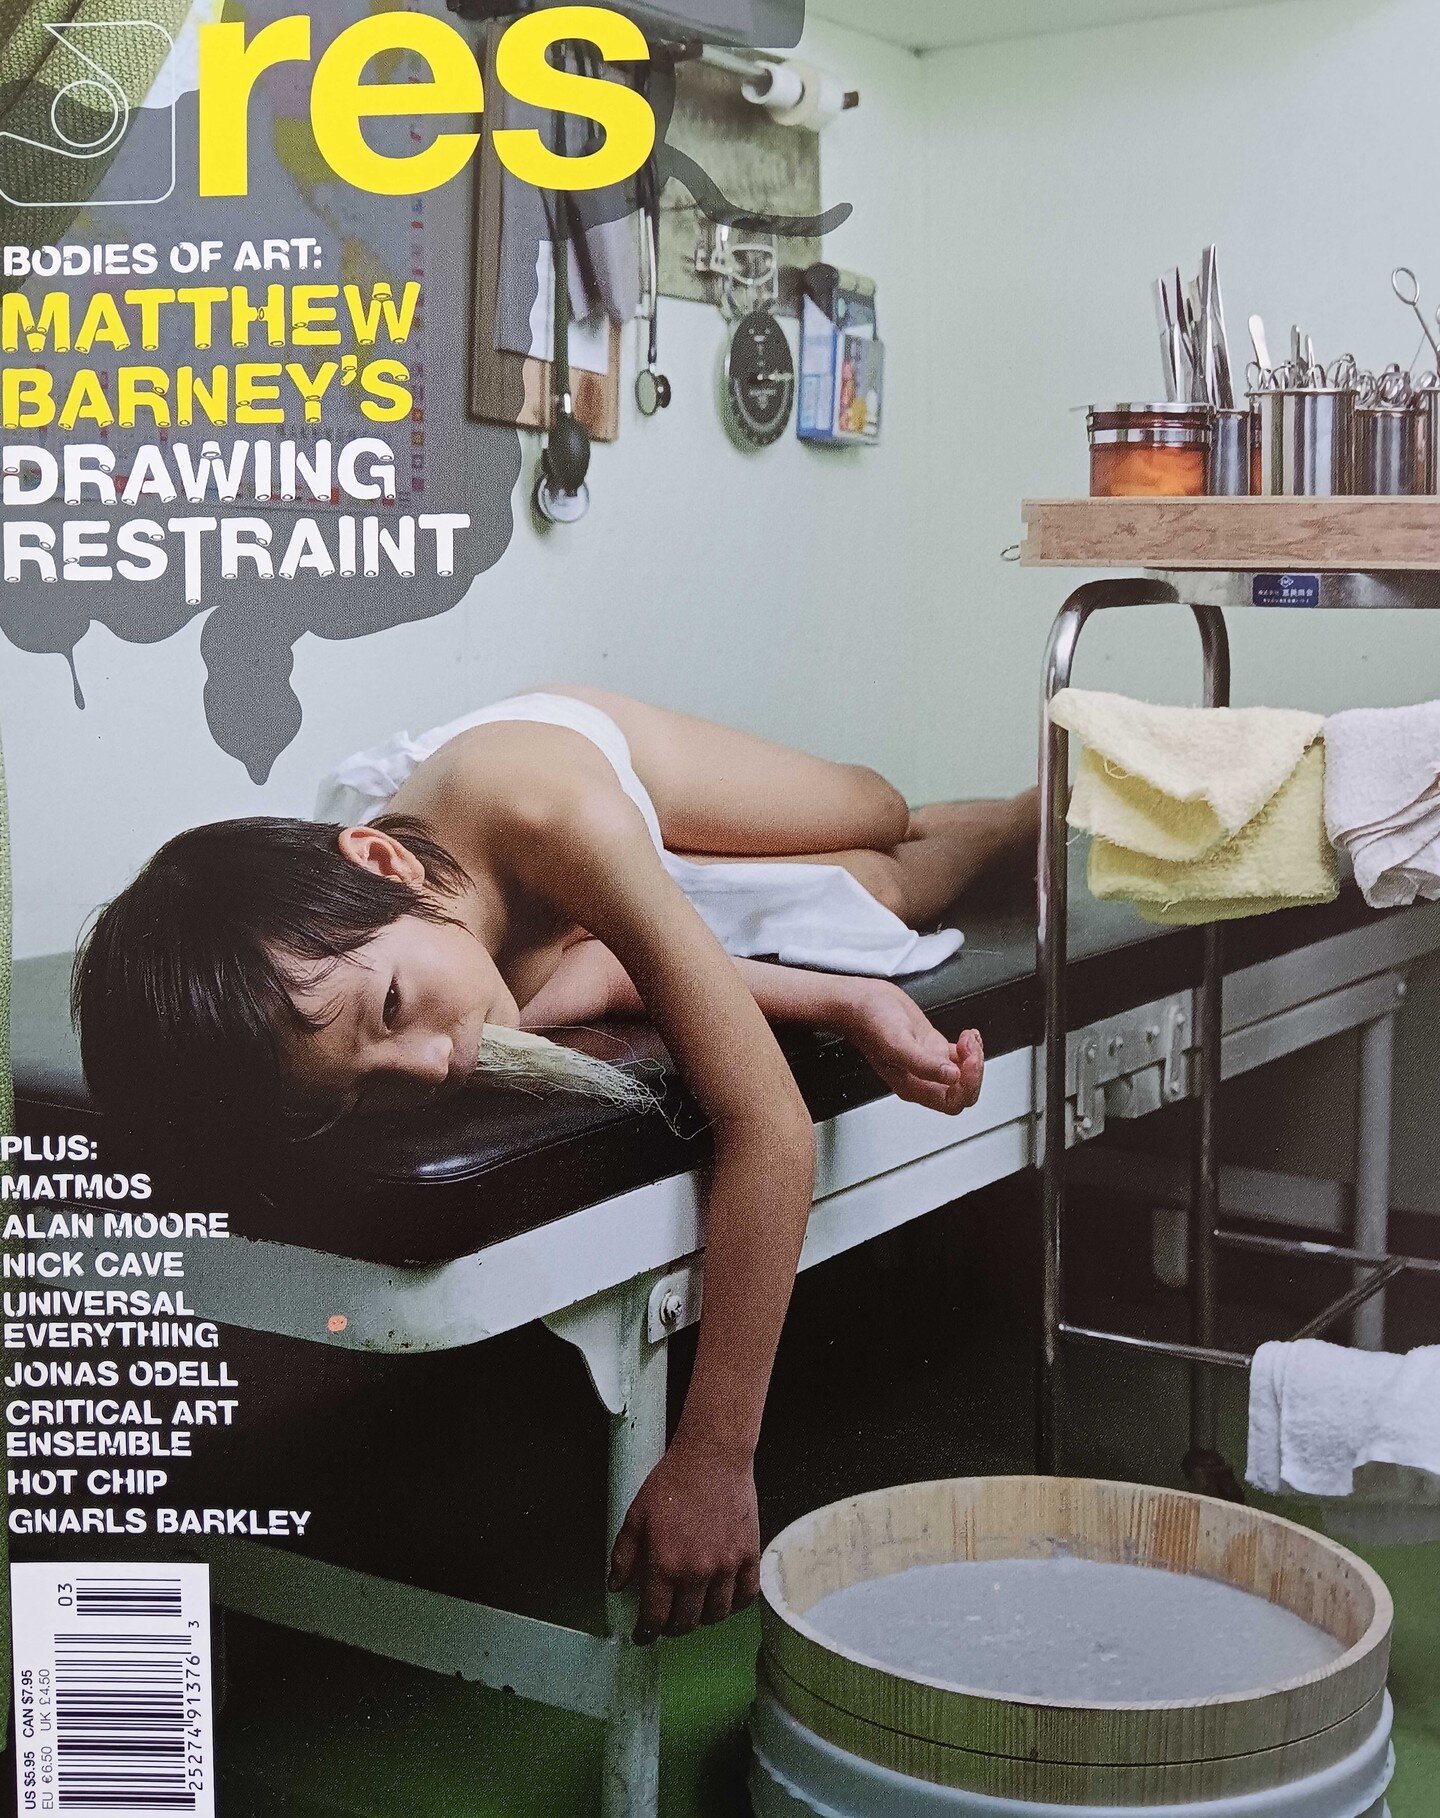 Weird Matthew Barney image on the cover of an issue of Res I wrote for way back when.